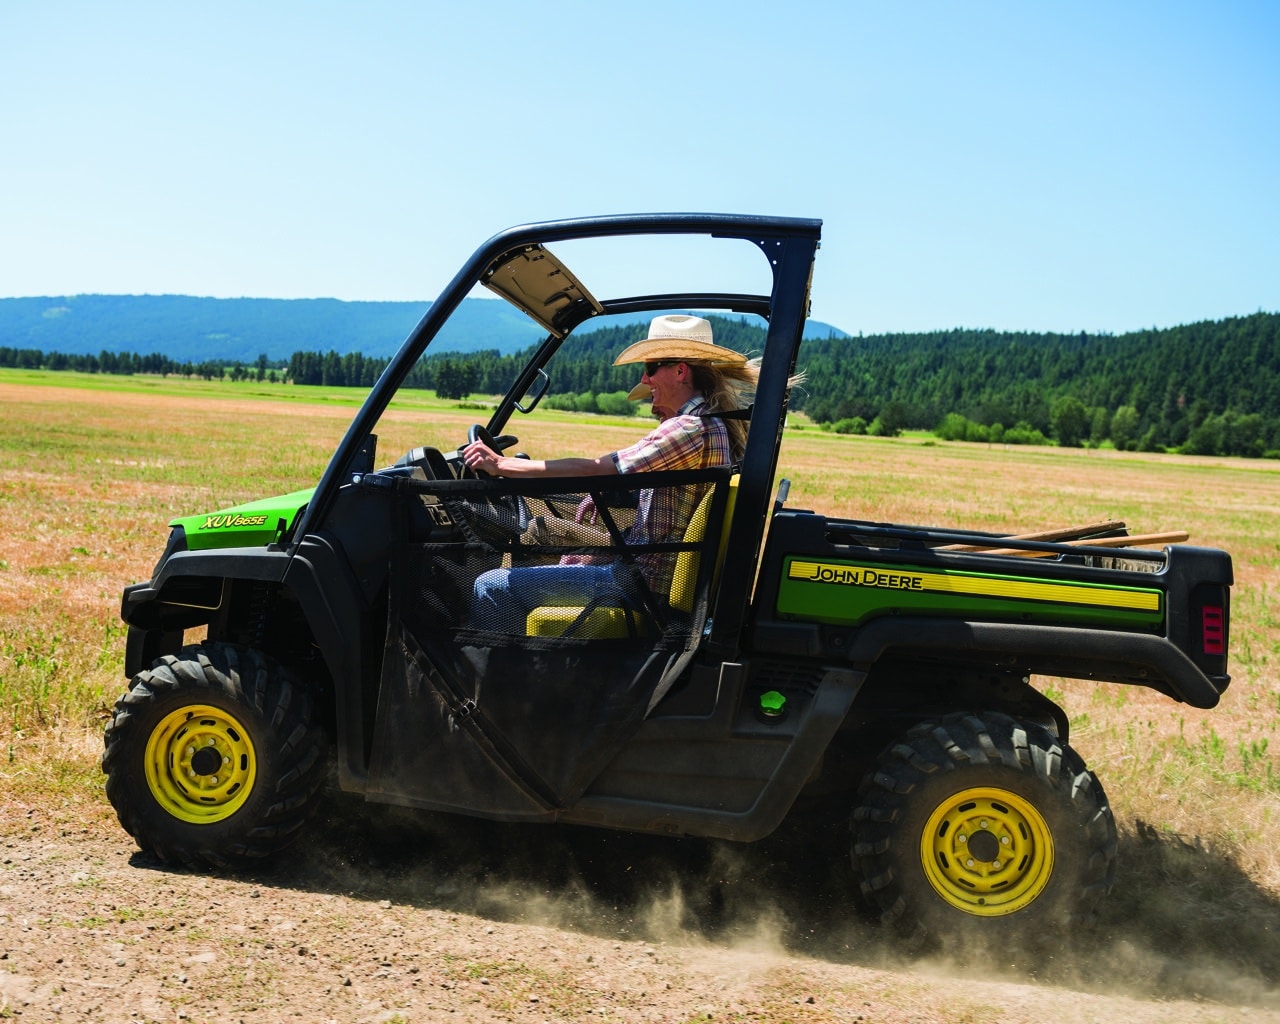 What is a Good Farm Utility Vehicle?